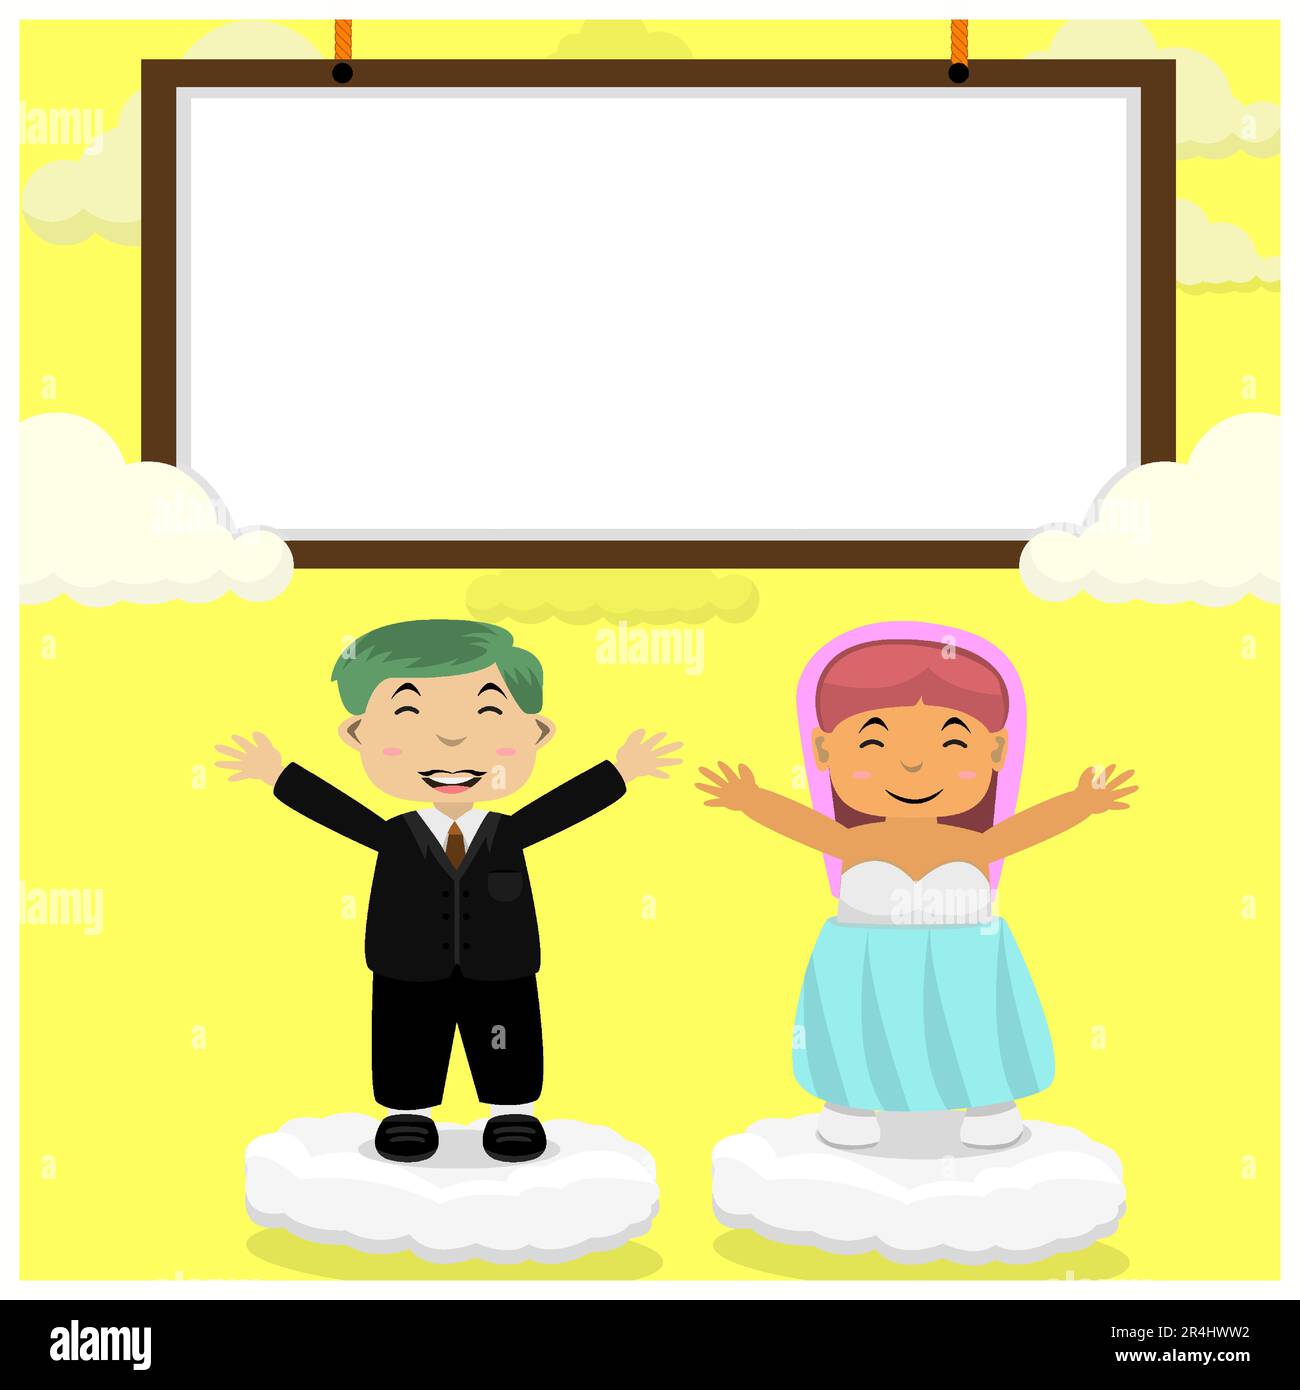 Vector Illustration Of Couple Wedding Template, White Board, Sky and Yellow Color Background. Stock Vector